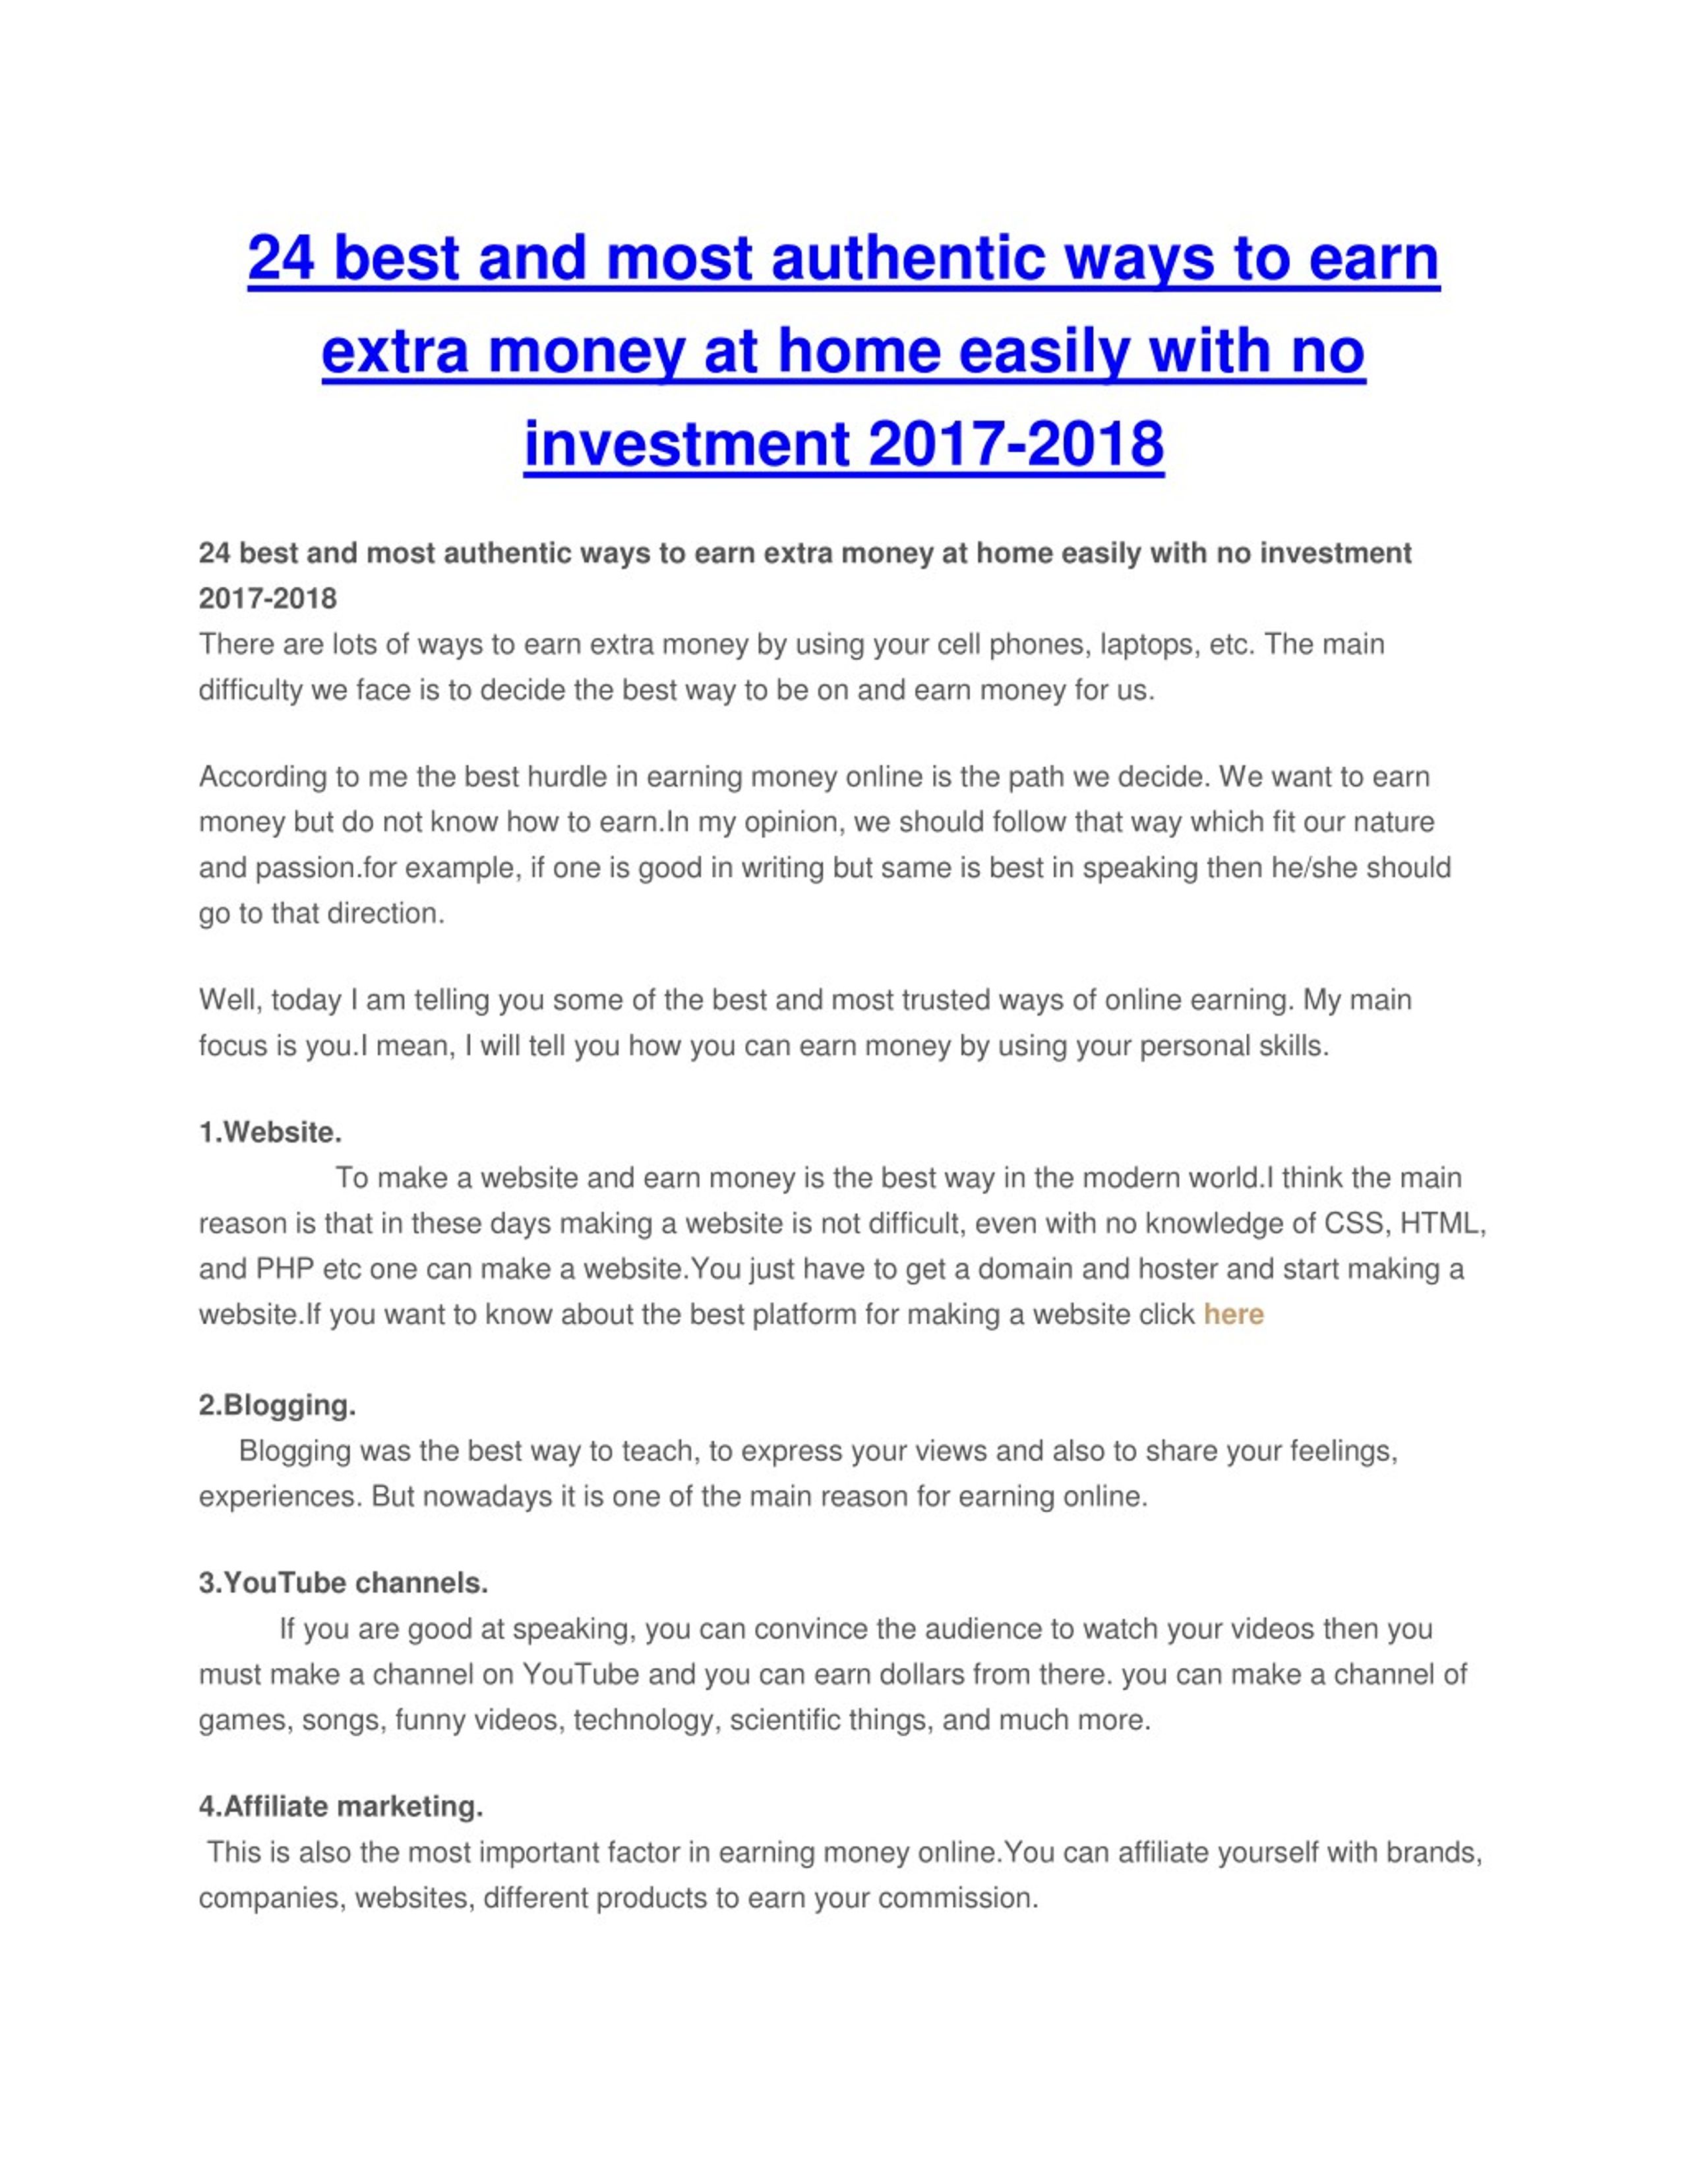 PPT - 24 best and most authentic ways to earn extra money at home